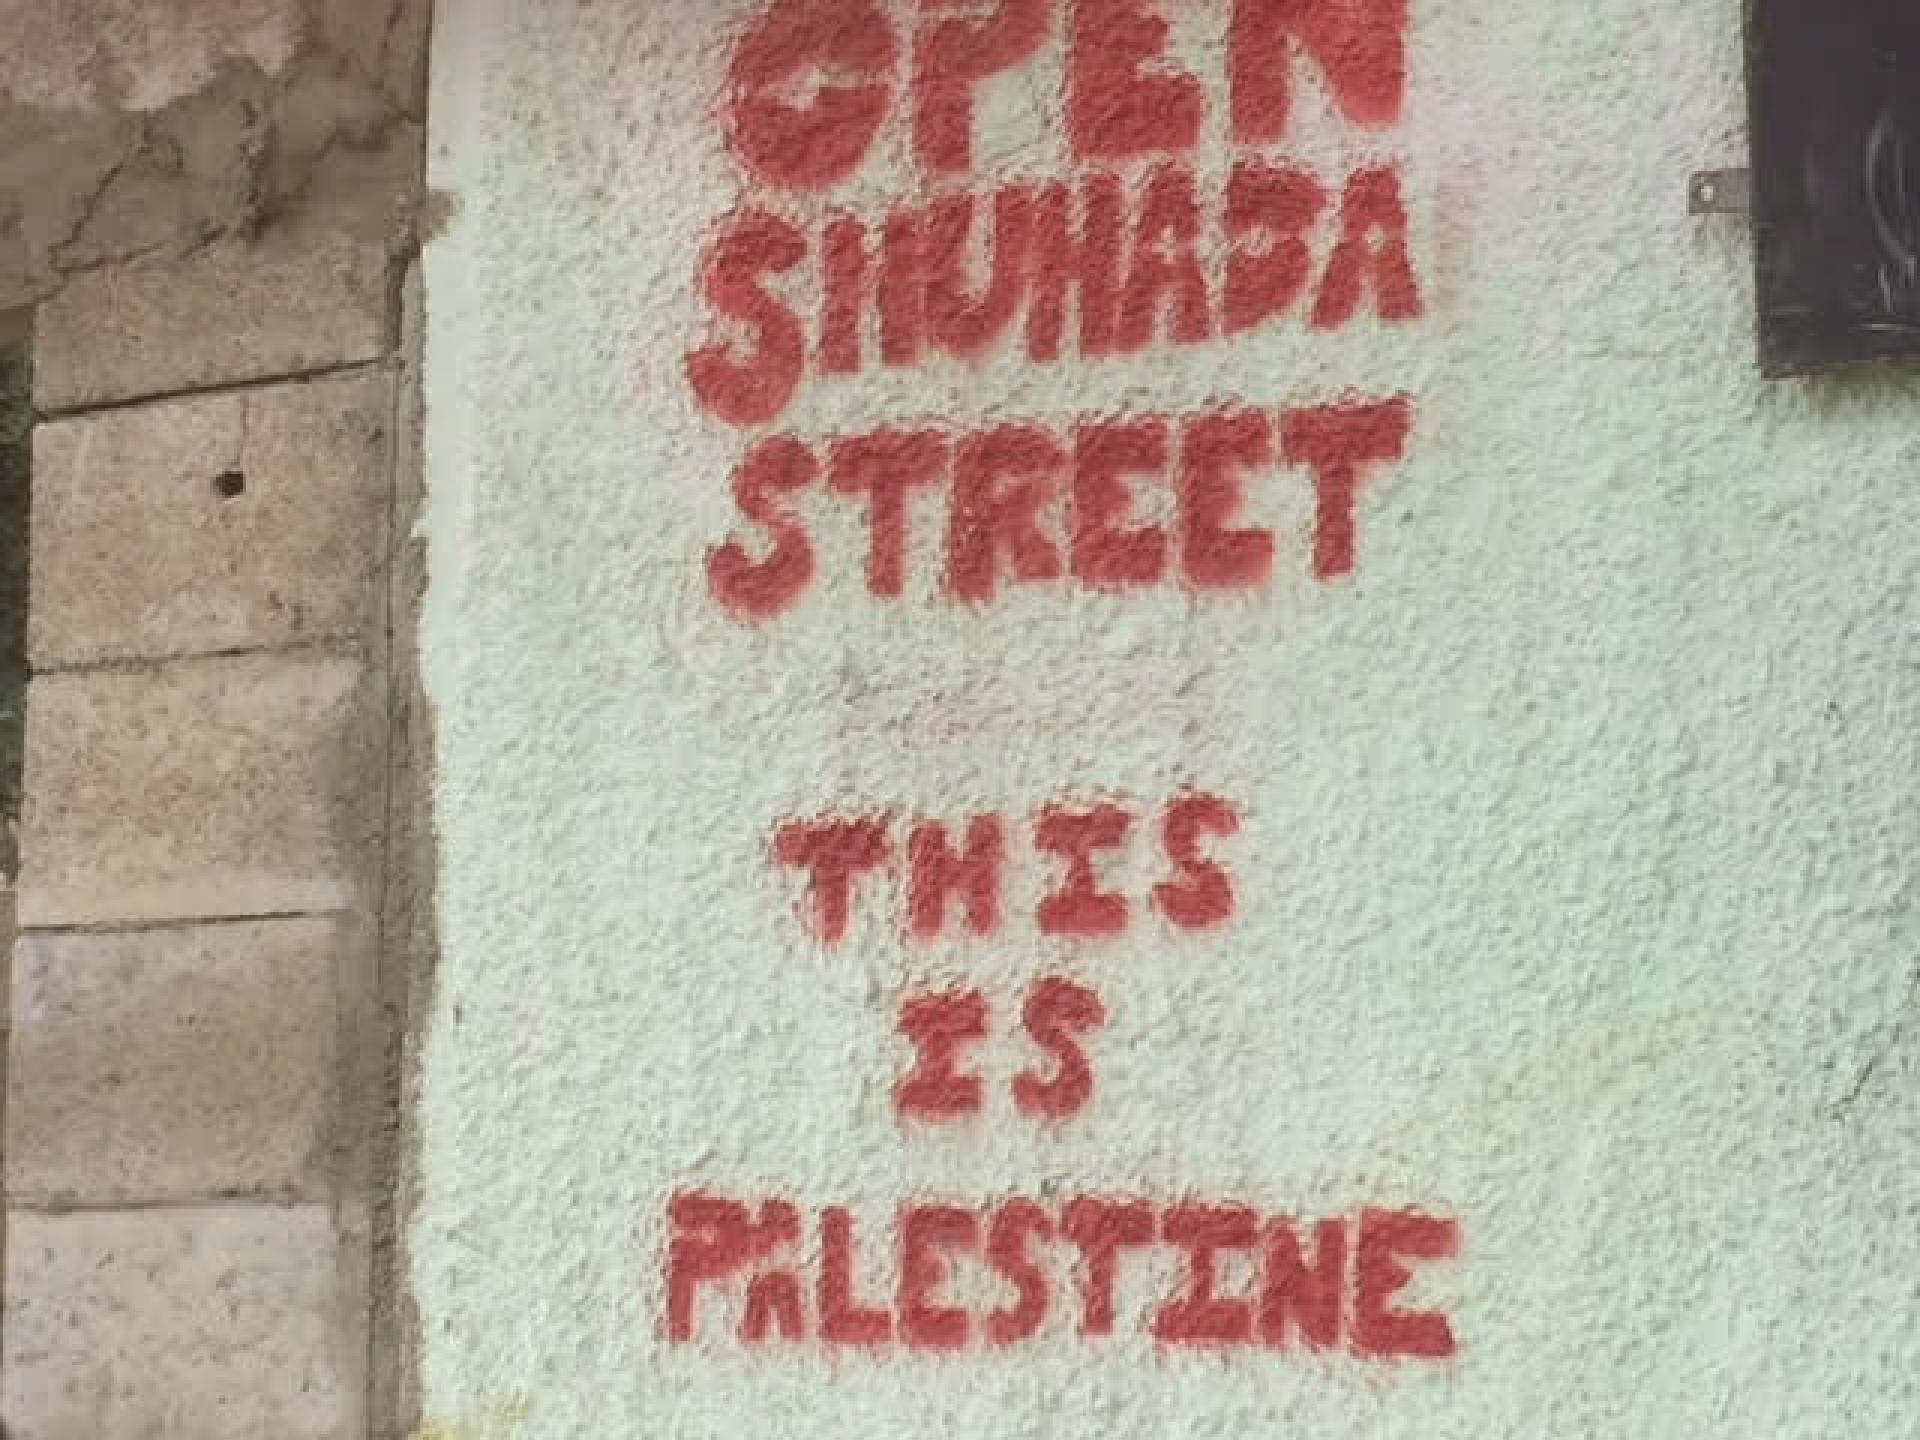 The "sumud" of the Palestinians is very impressive